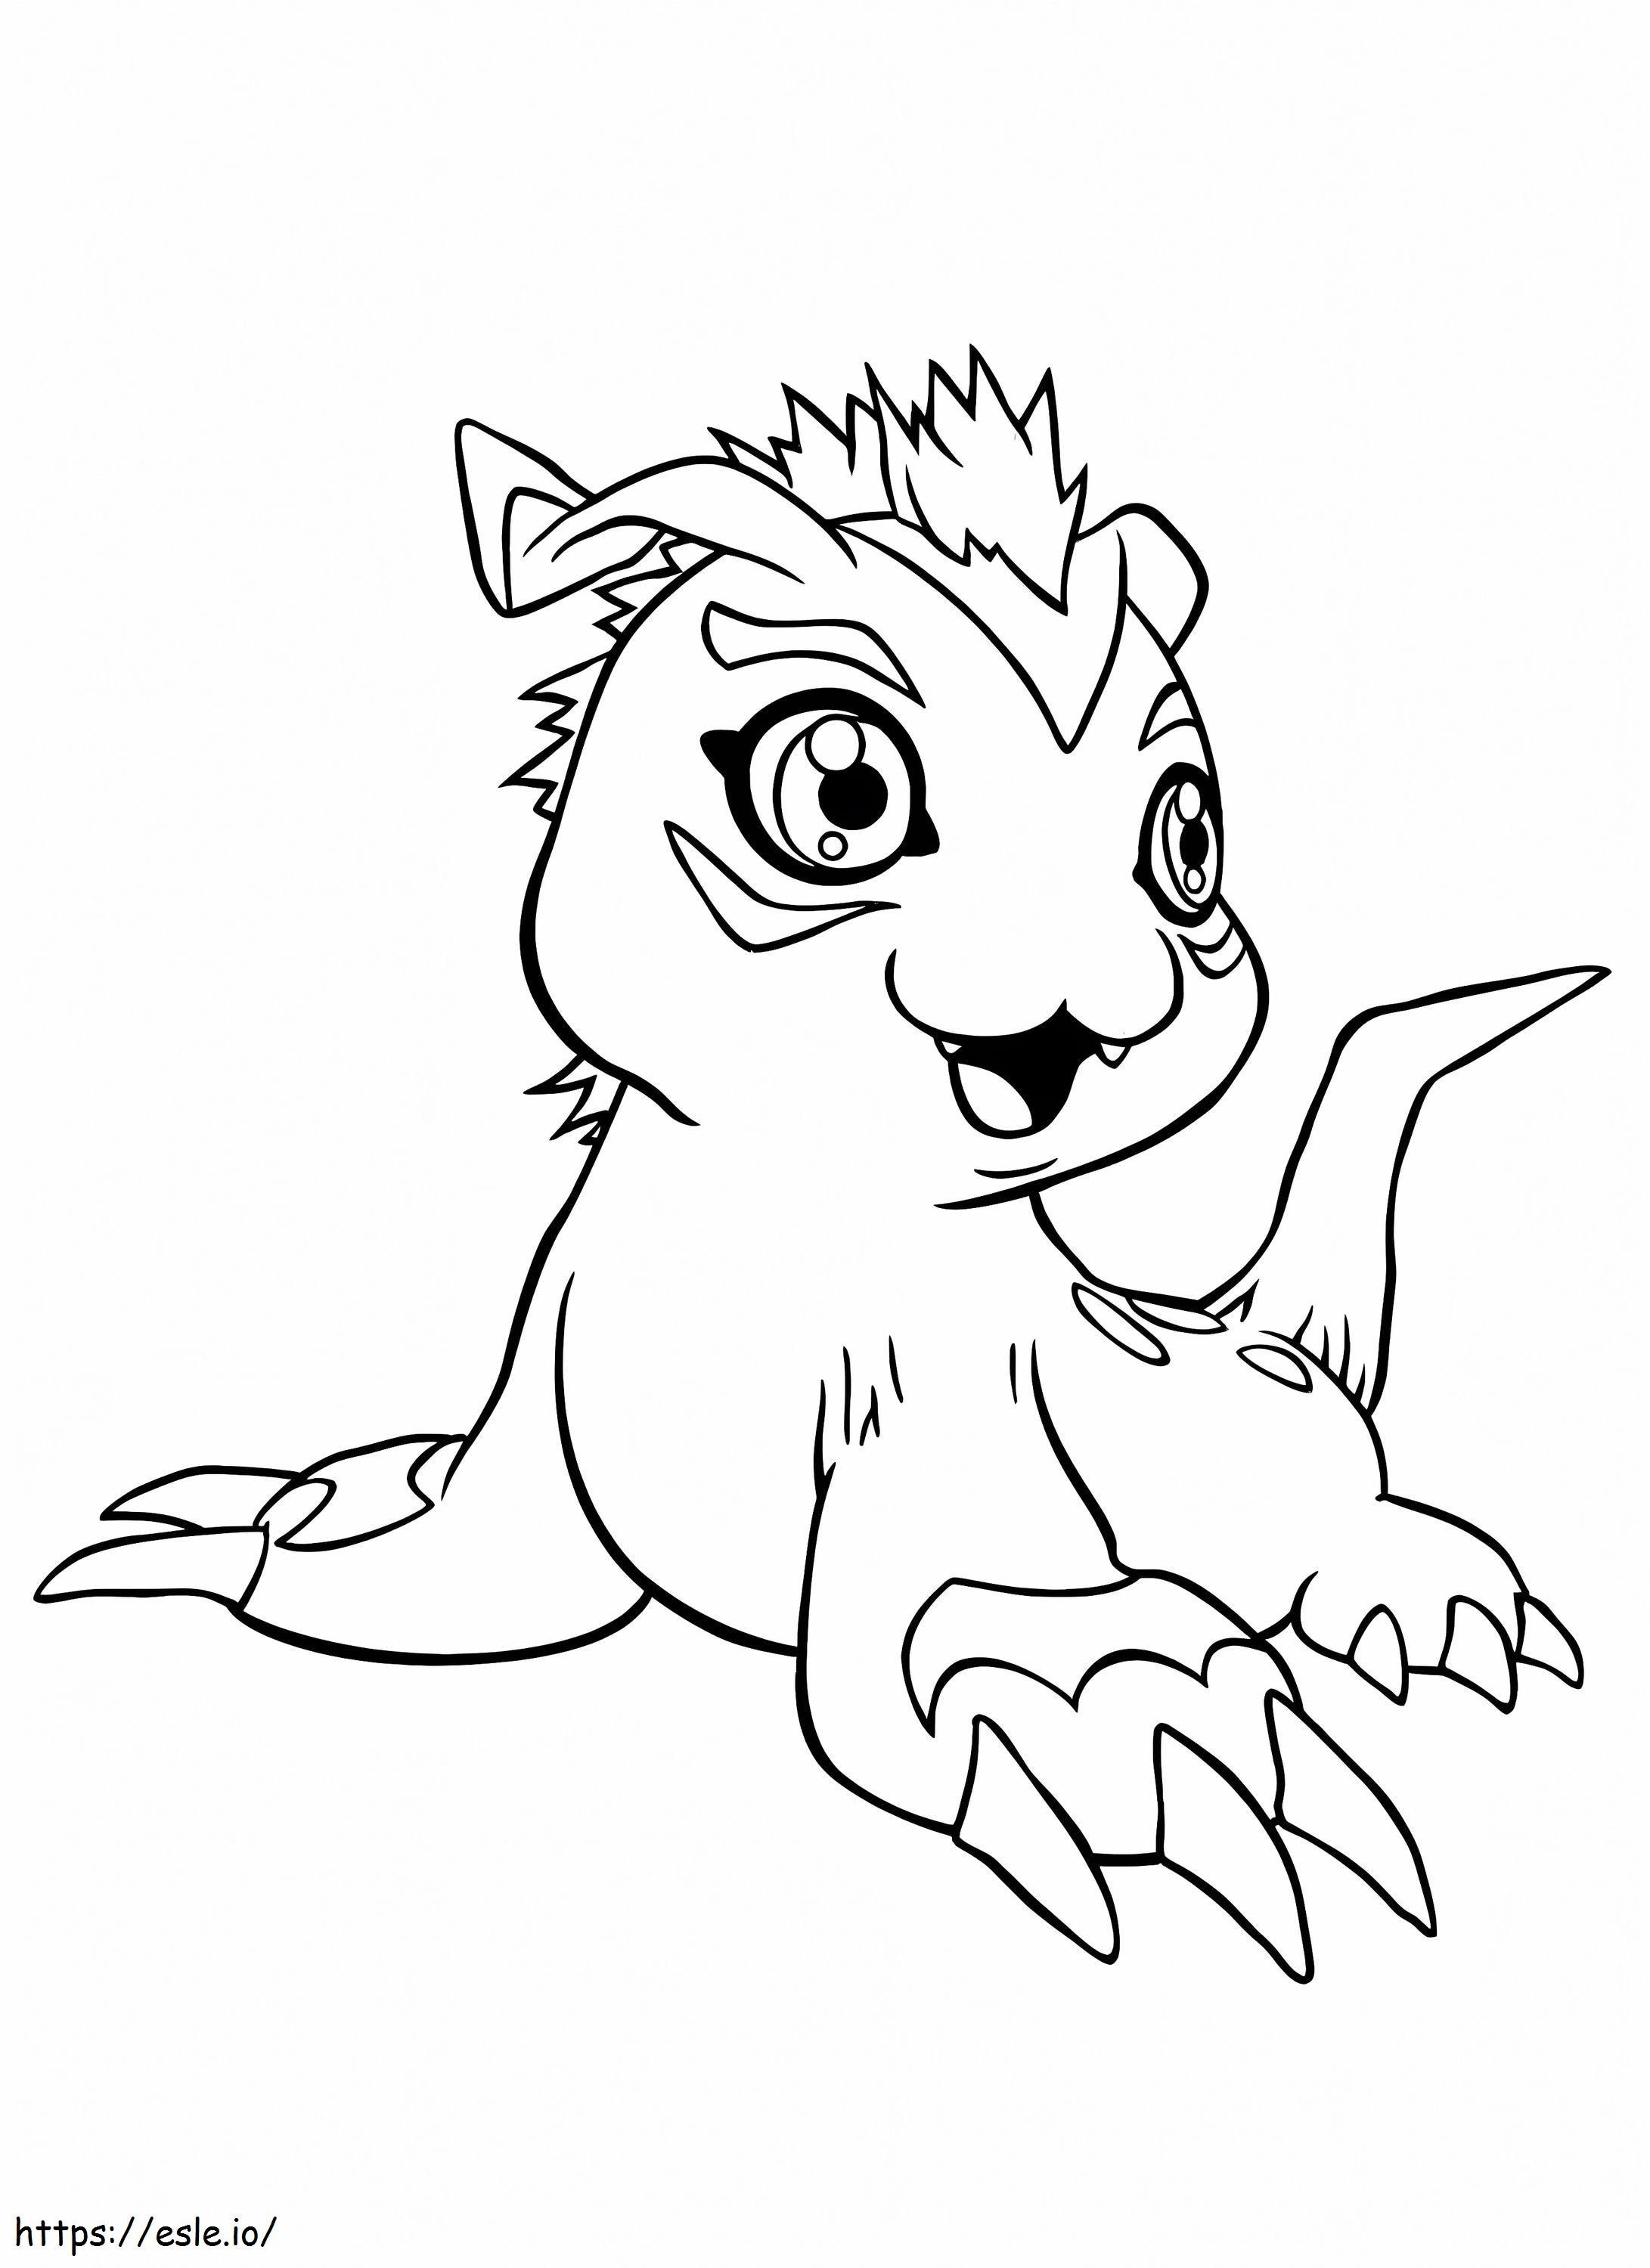 Gomamon Sitting coloring page